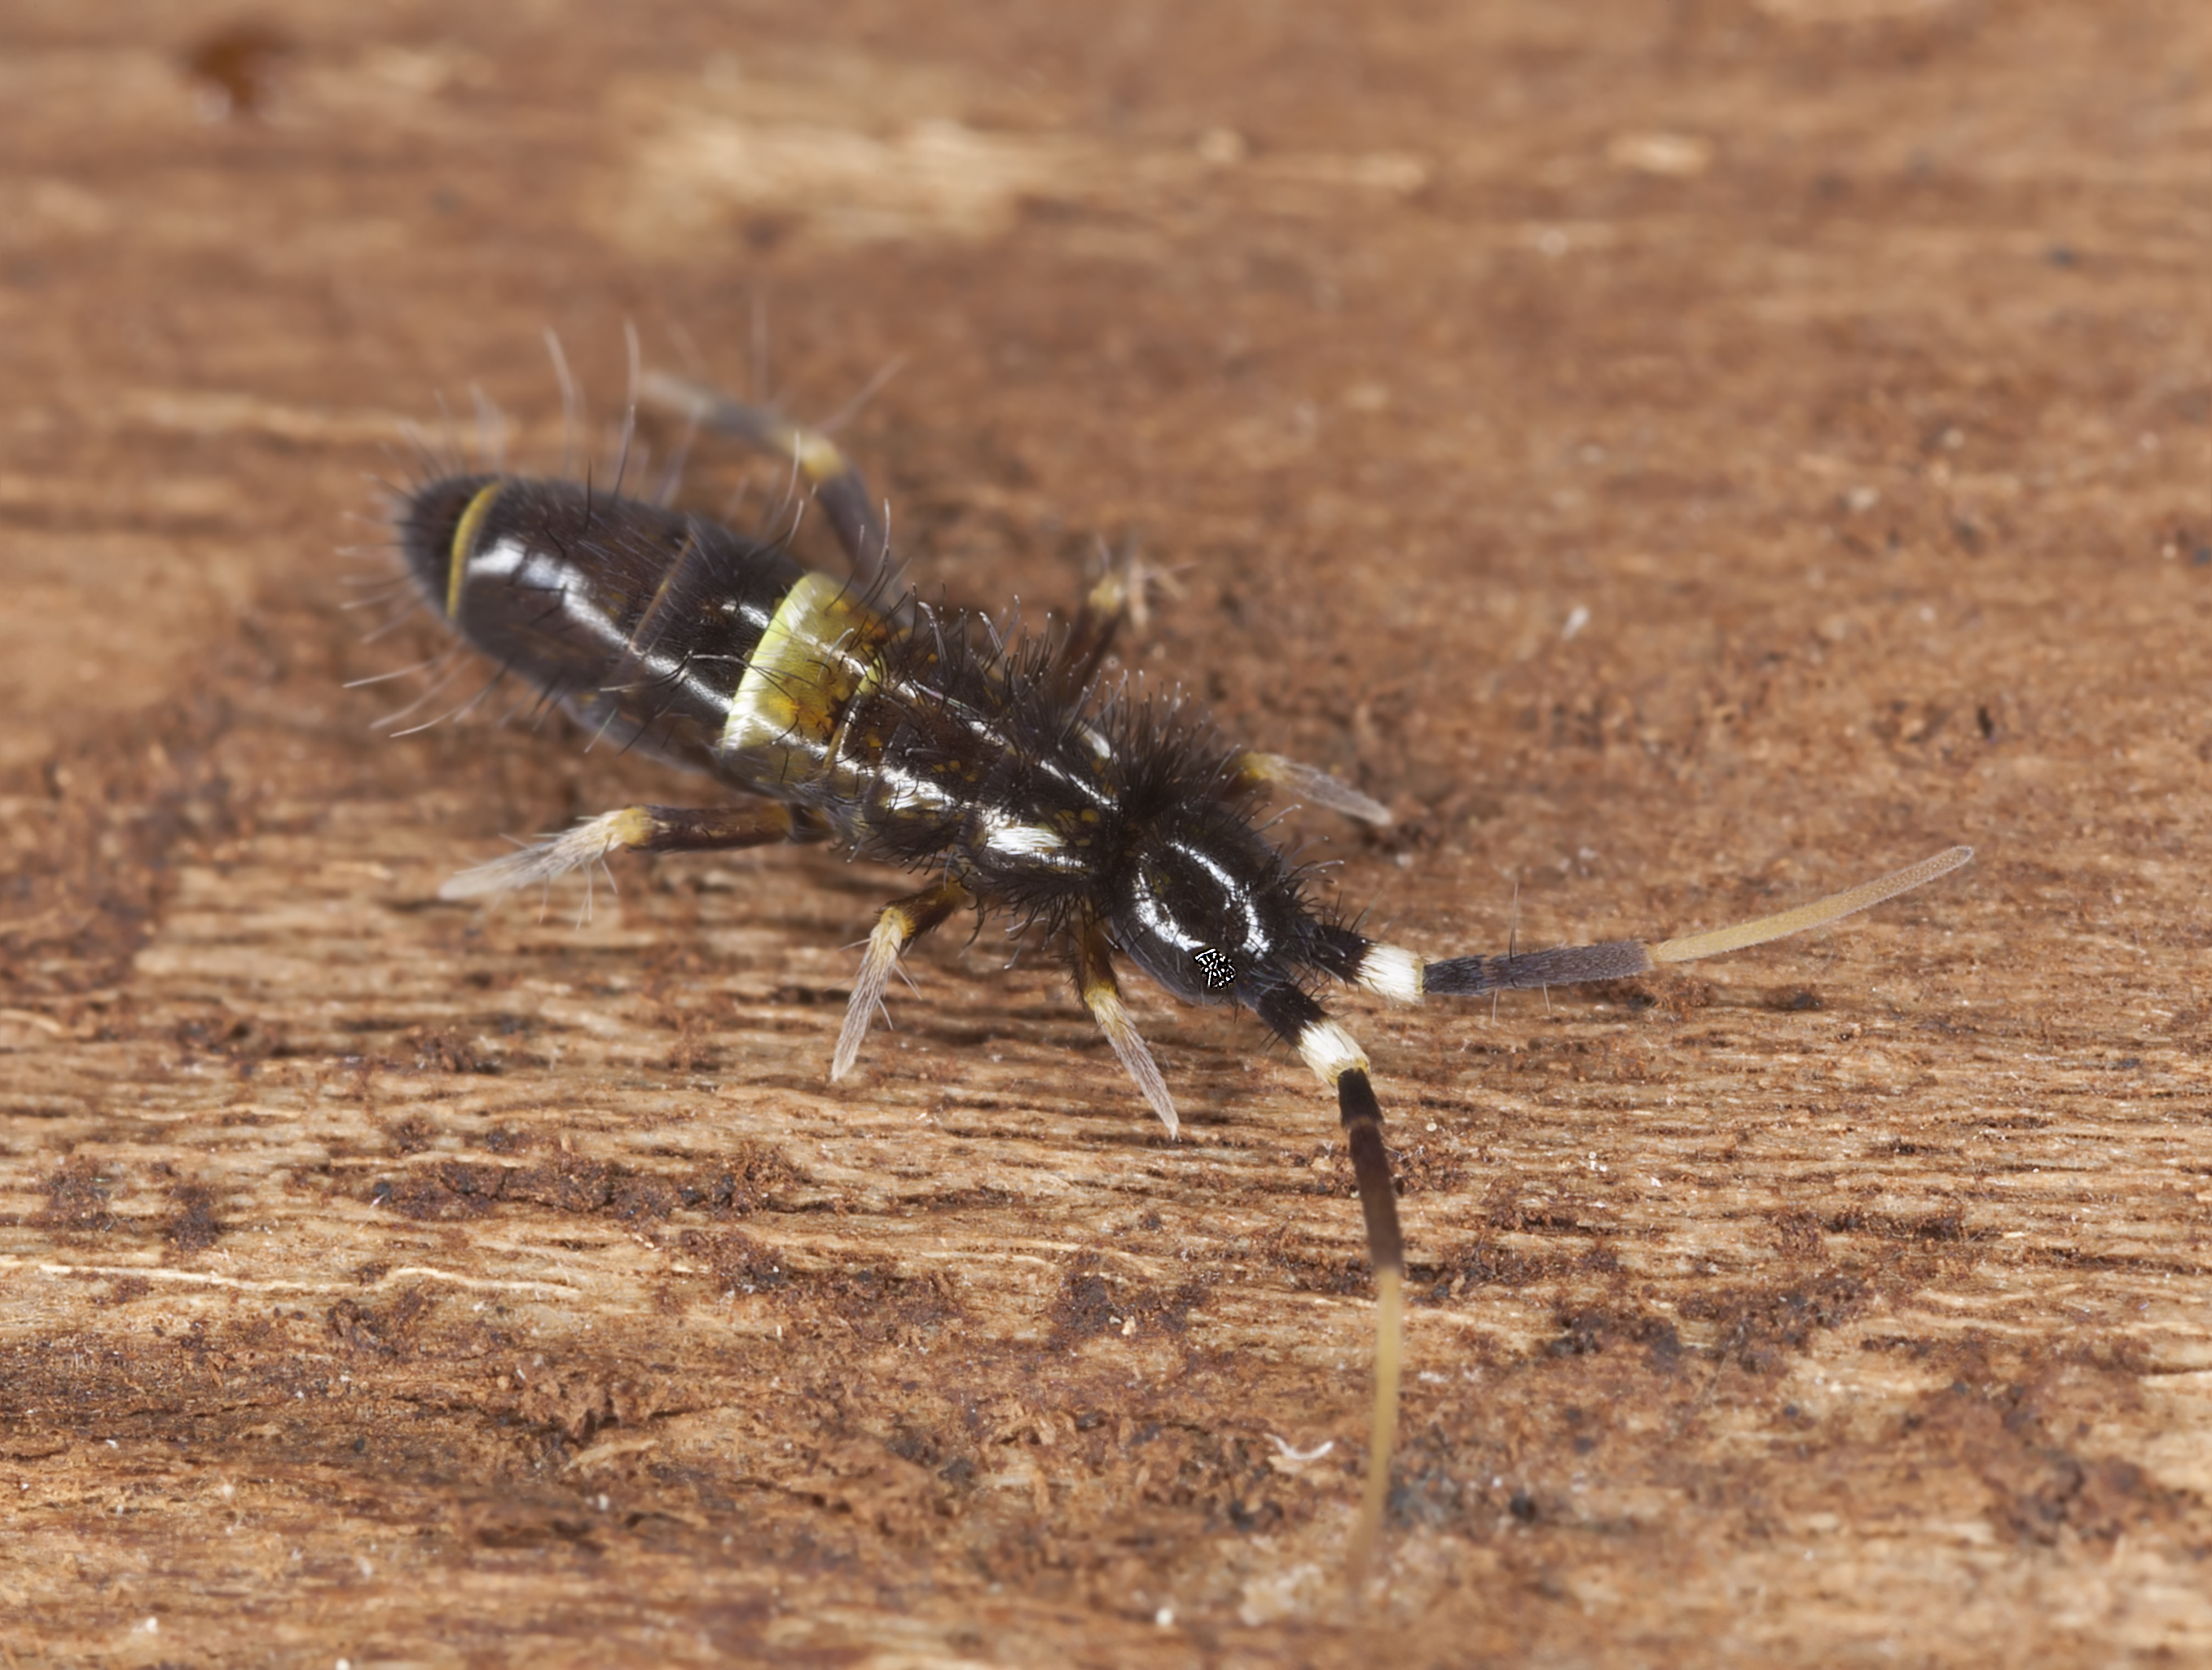 Springtail  Horticulture and Home Pest News